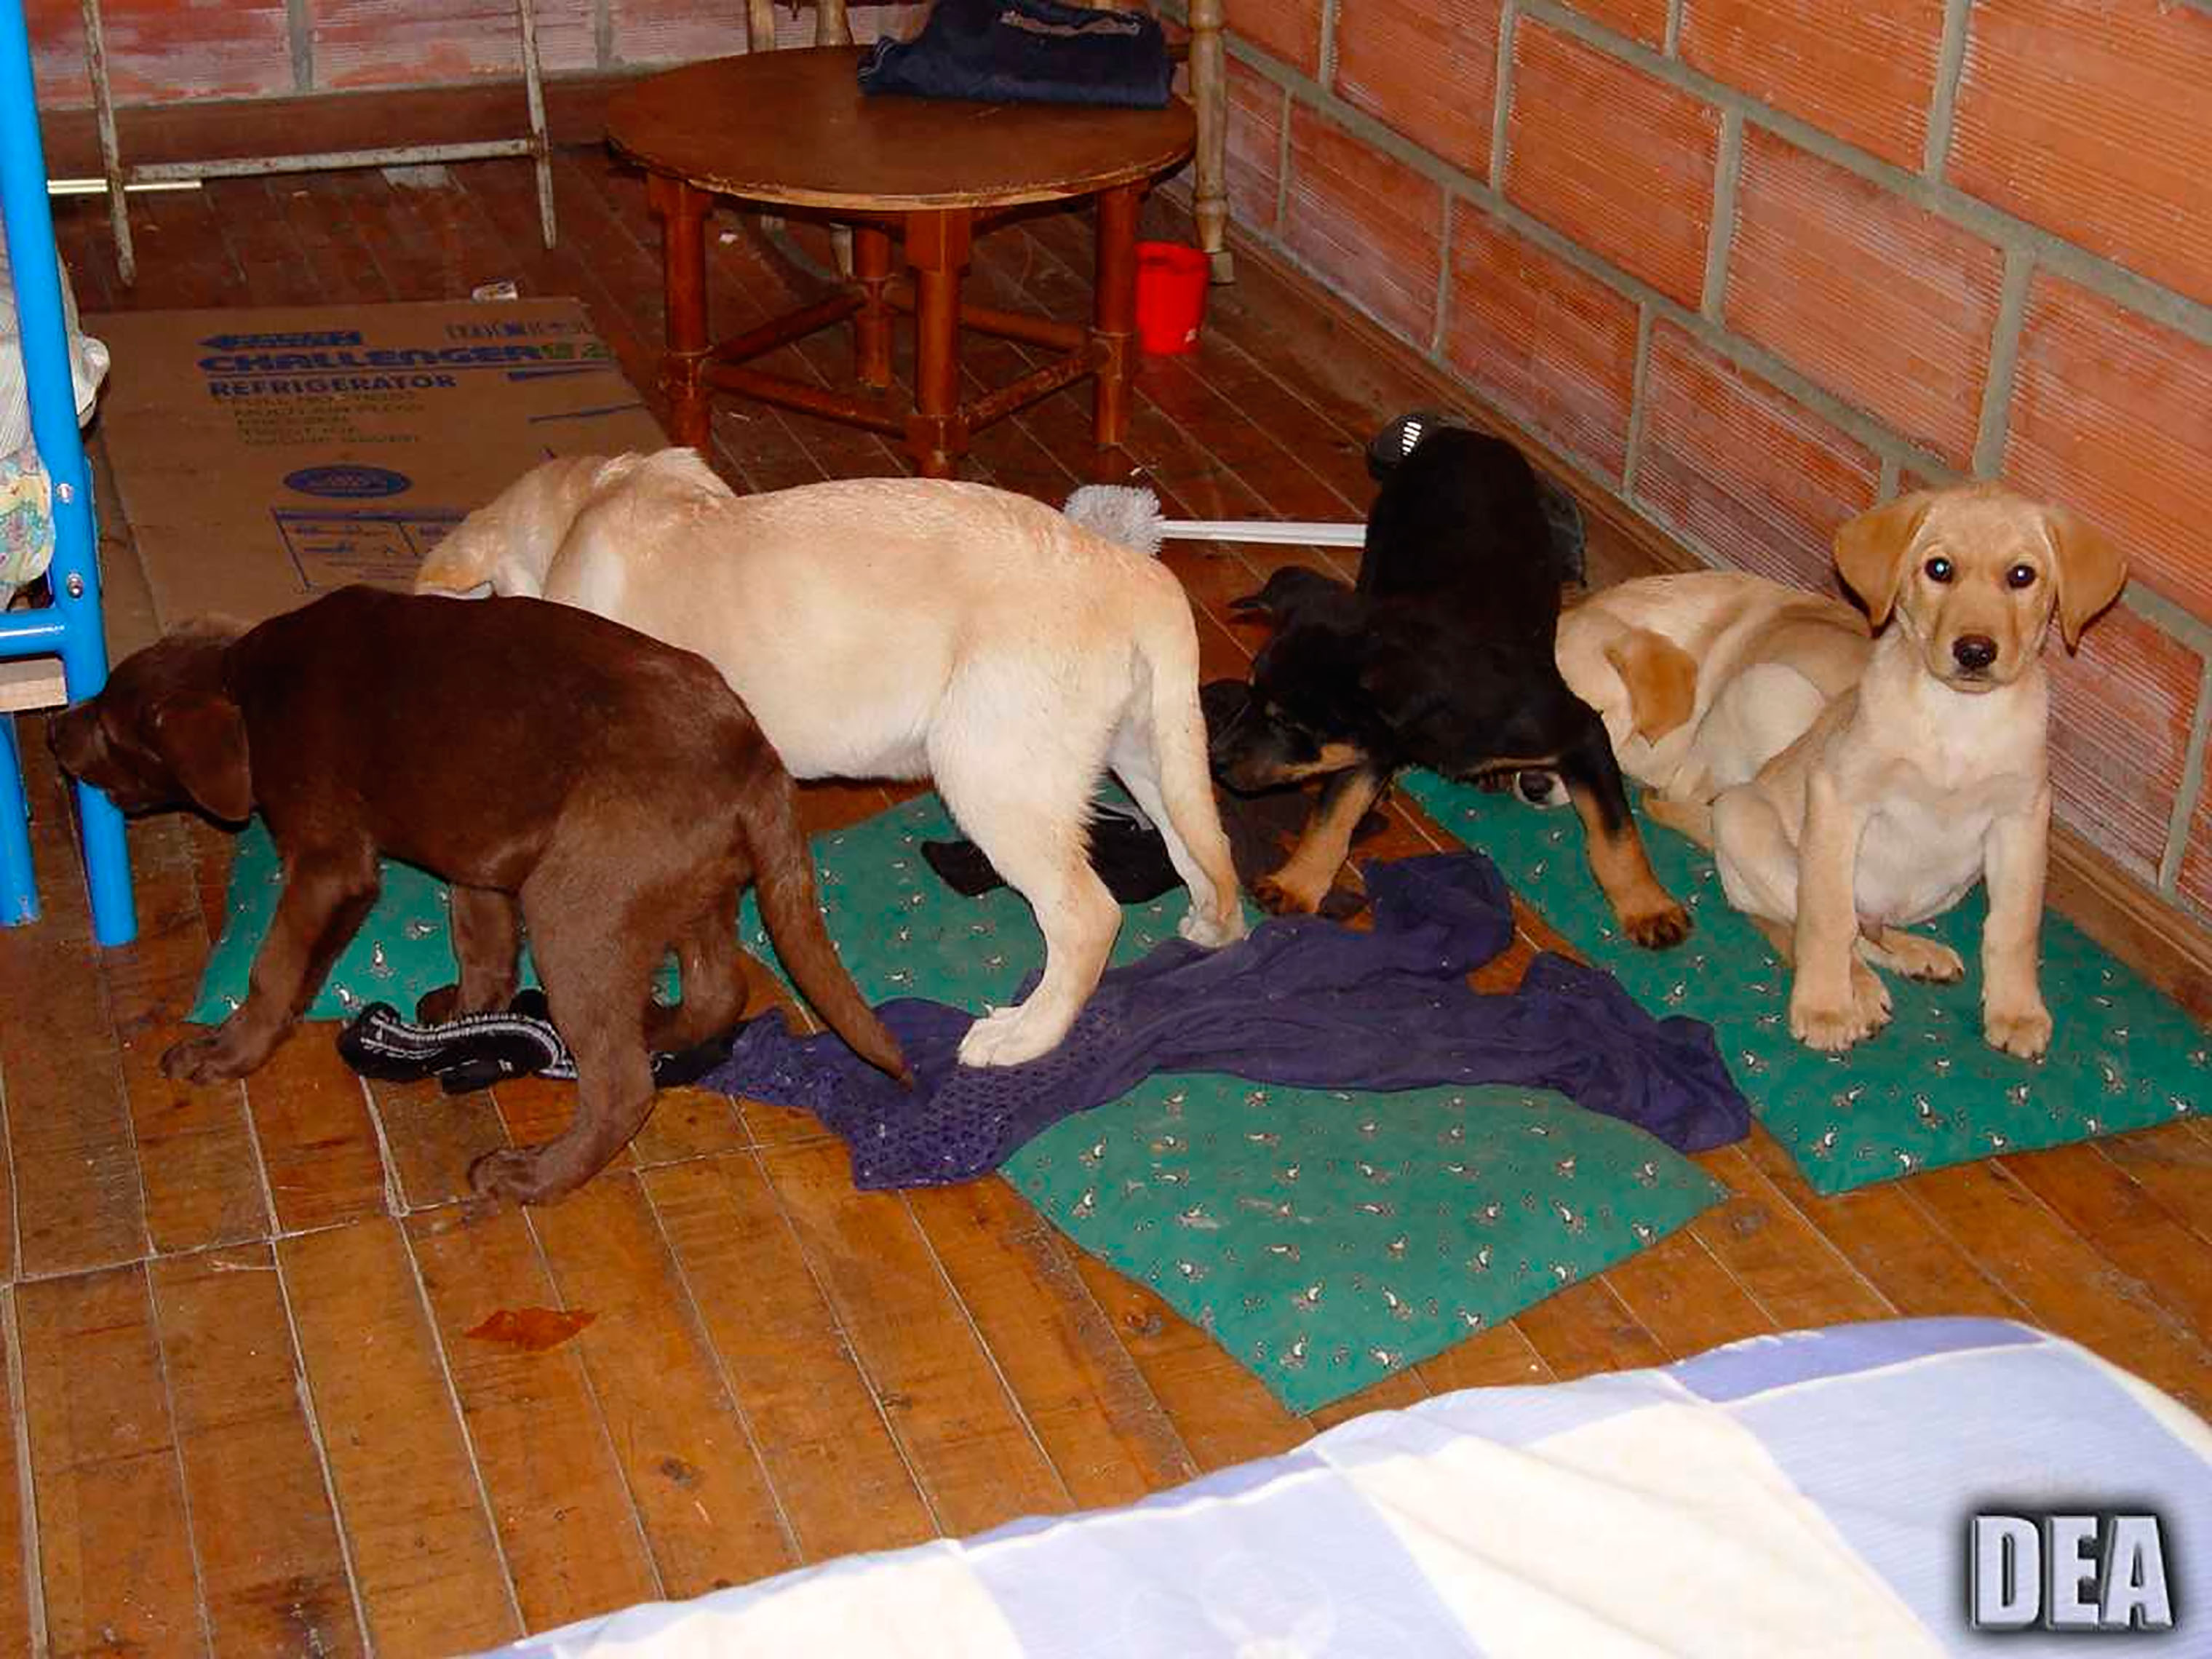 This 2005 photo provided by U.S. Drug Enforcement Administration officials shows puppies rescued from a farm in Colombia destined for use by a veterinarian working for a Colombian drug trafficking ring. (U.S. Drug Enforcement Administration/AP)